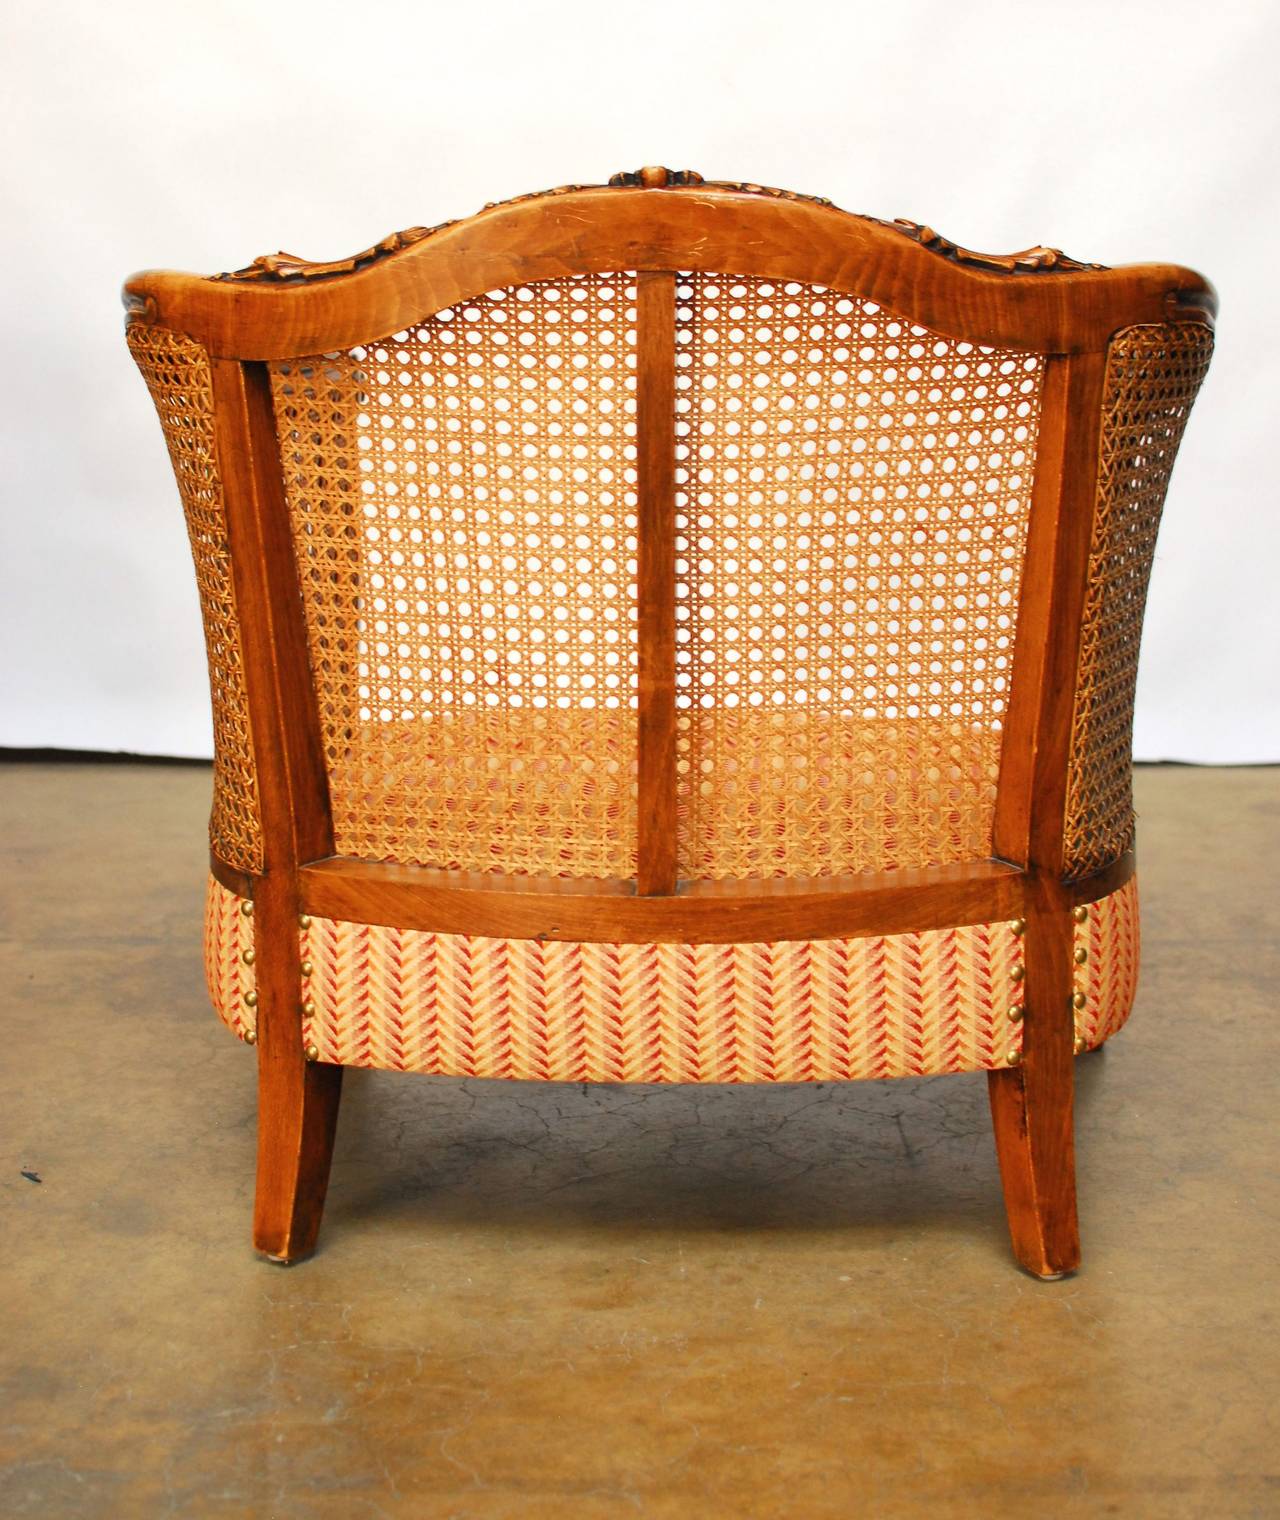 Carved 19th Century French Cane Bergére Chairs